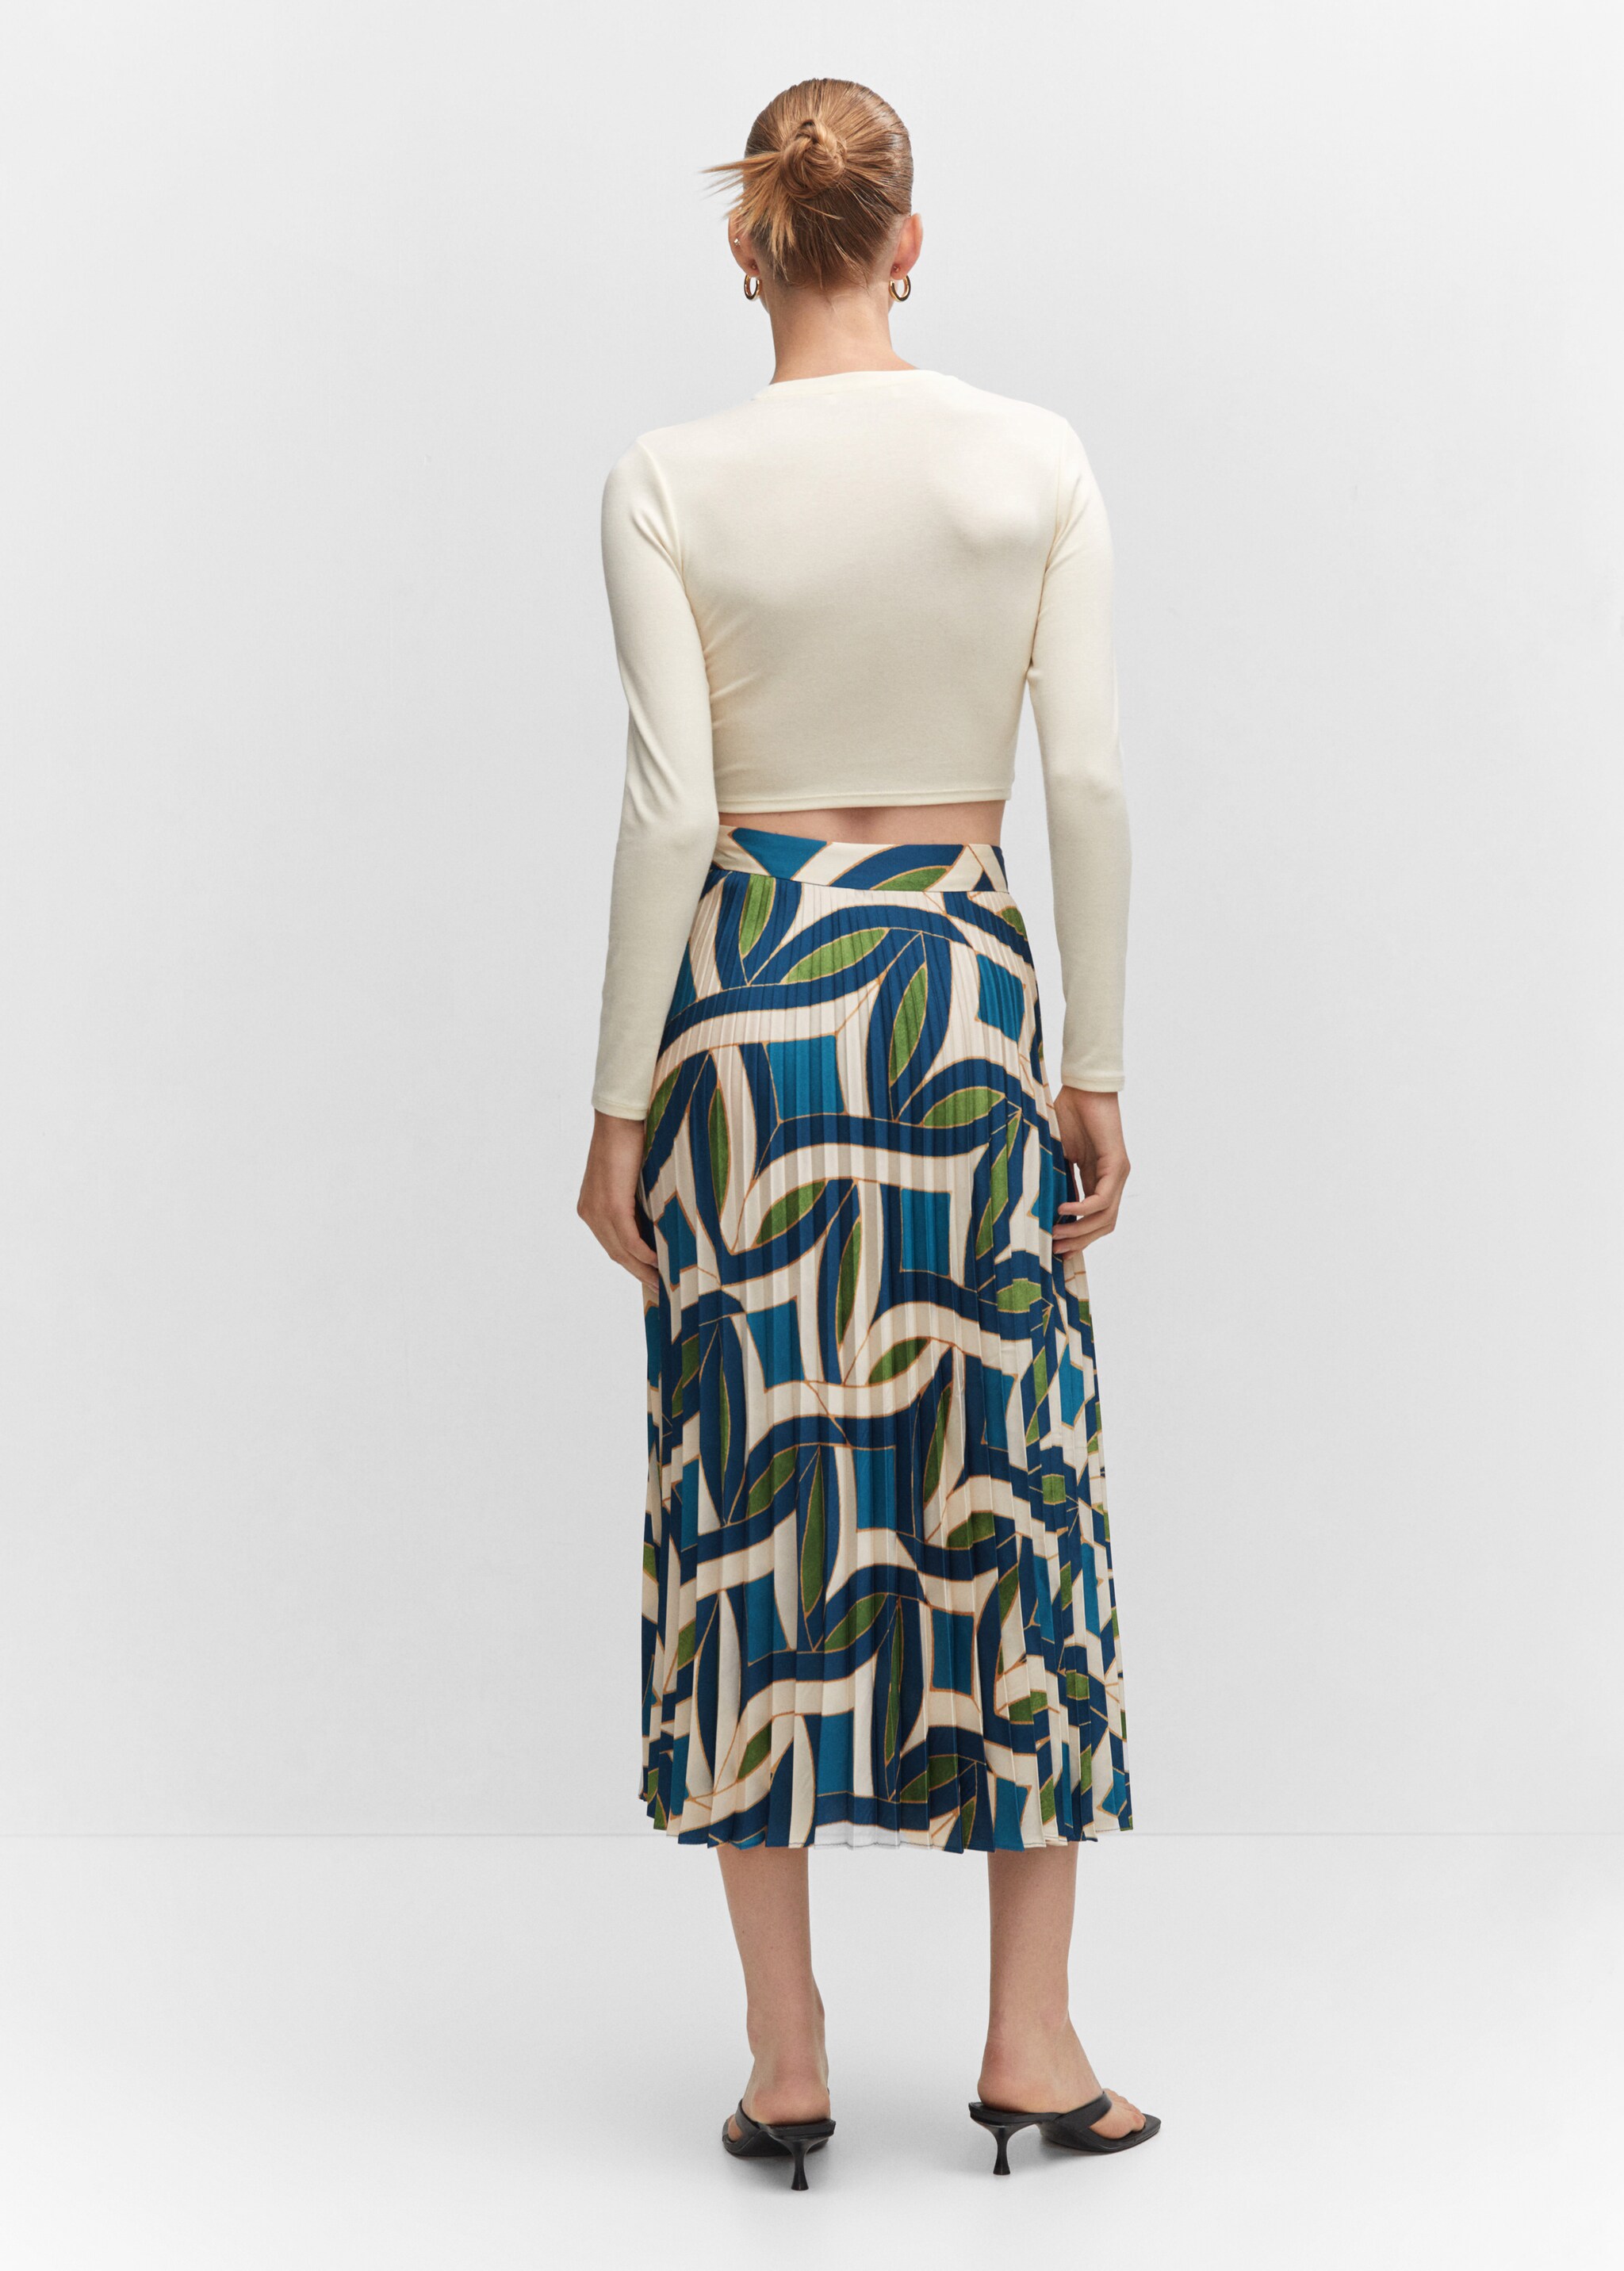 Printed pleated skirt - Reverse of the article